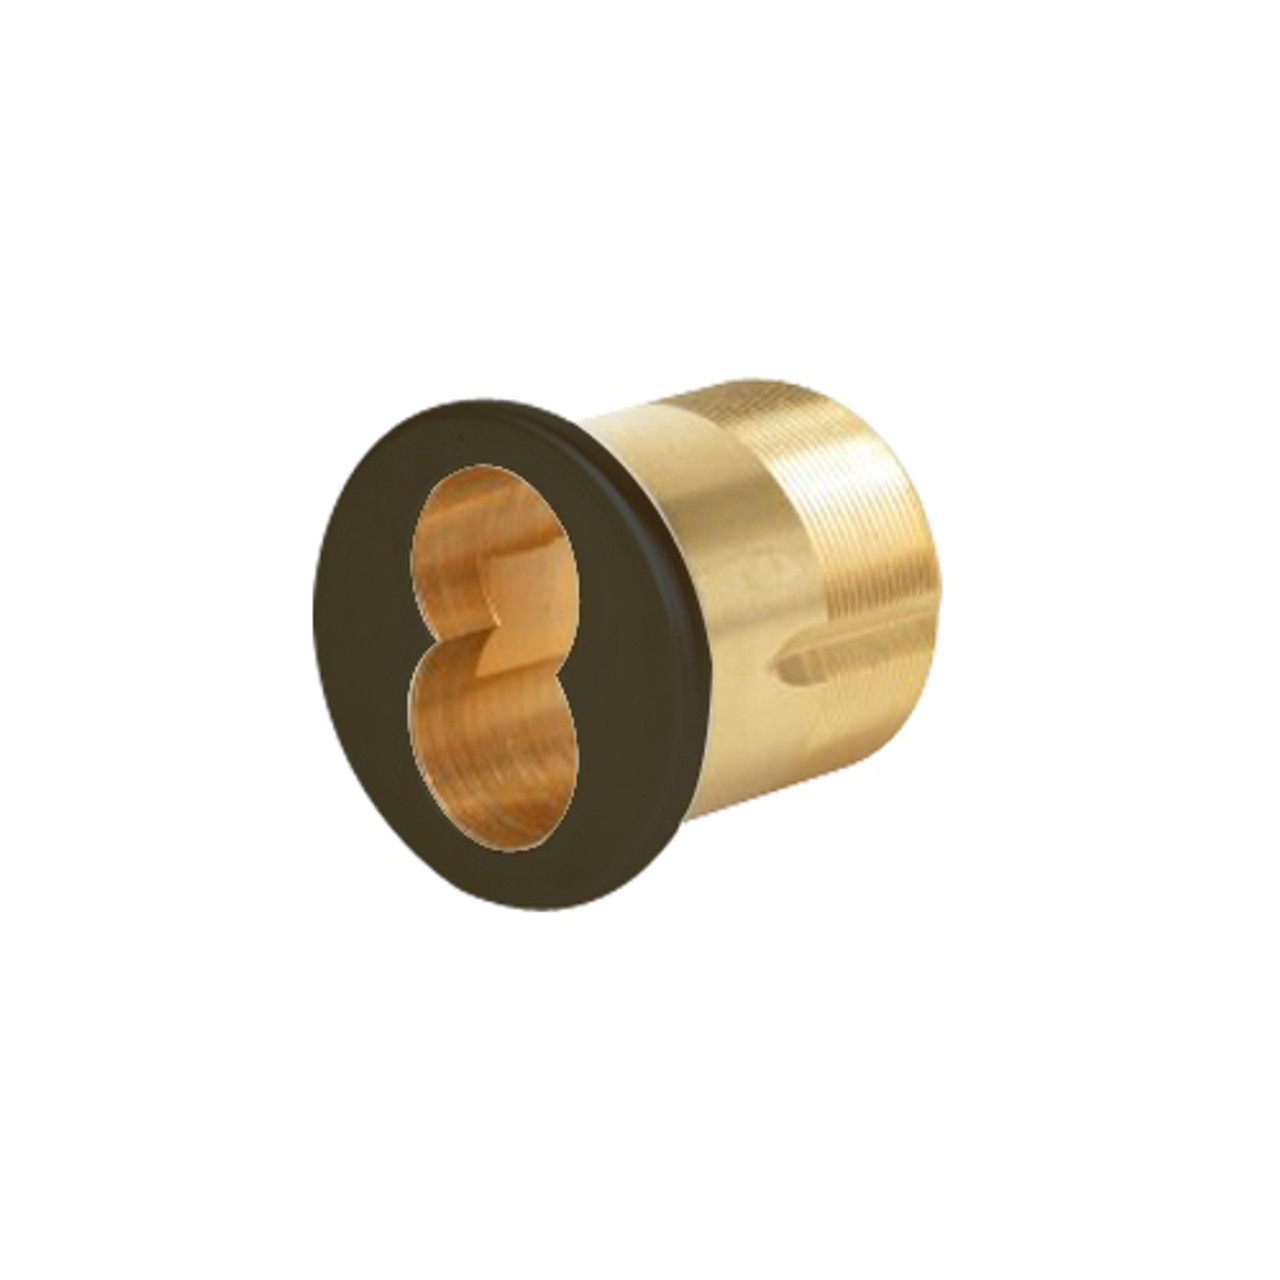 CR1070-114-A03-6-613 Corbin Mortise Interchangeable Core Housing with Adams Rite MS Cam in Oil Rubbed Bronze Finish